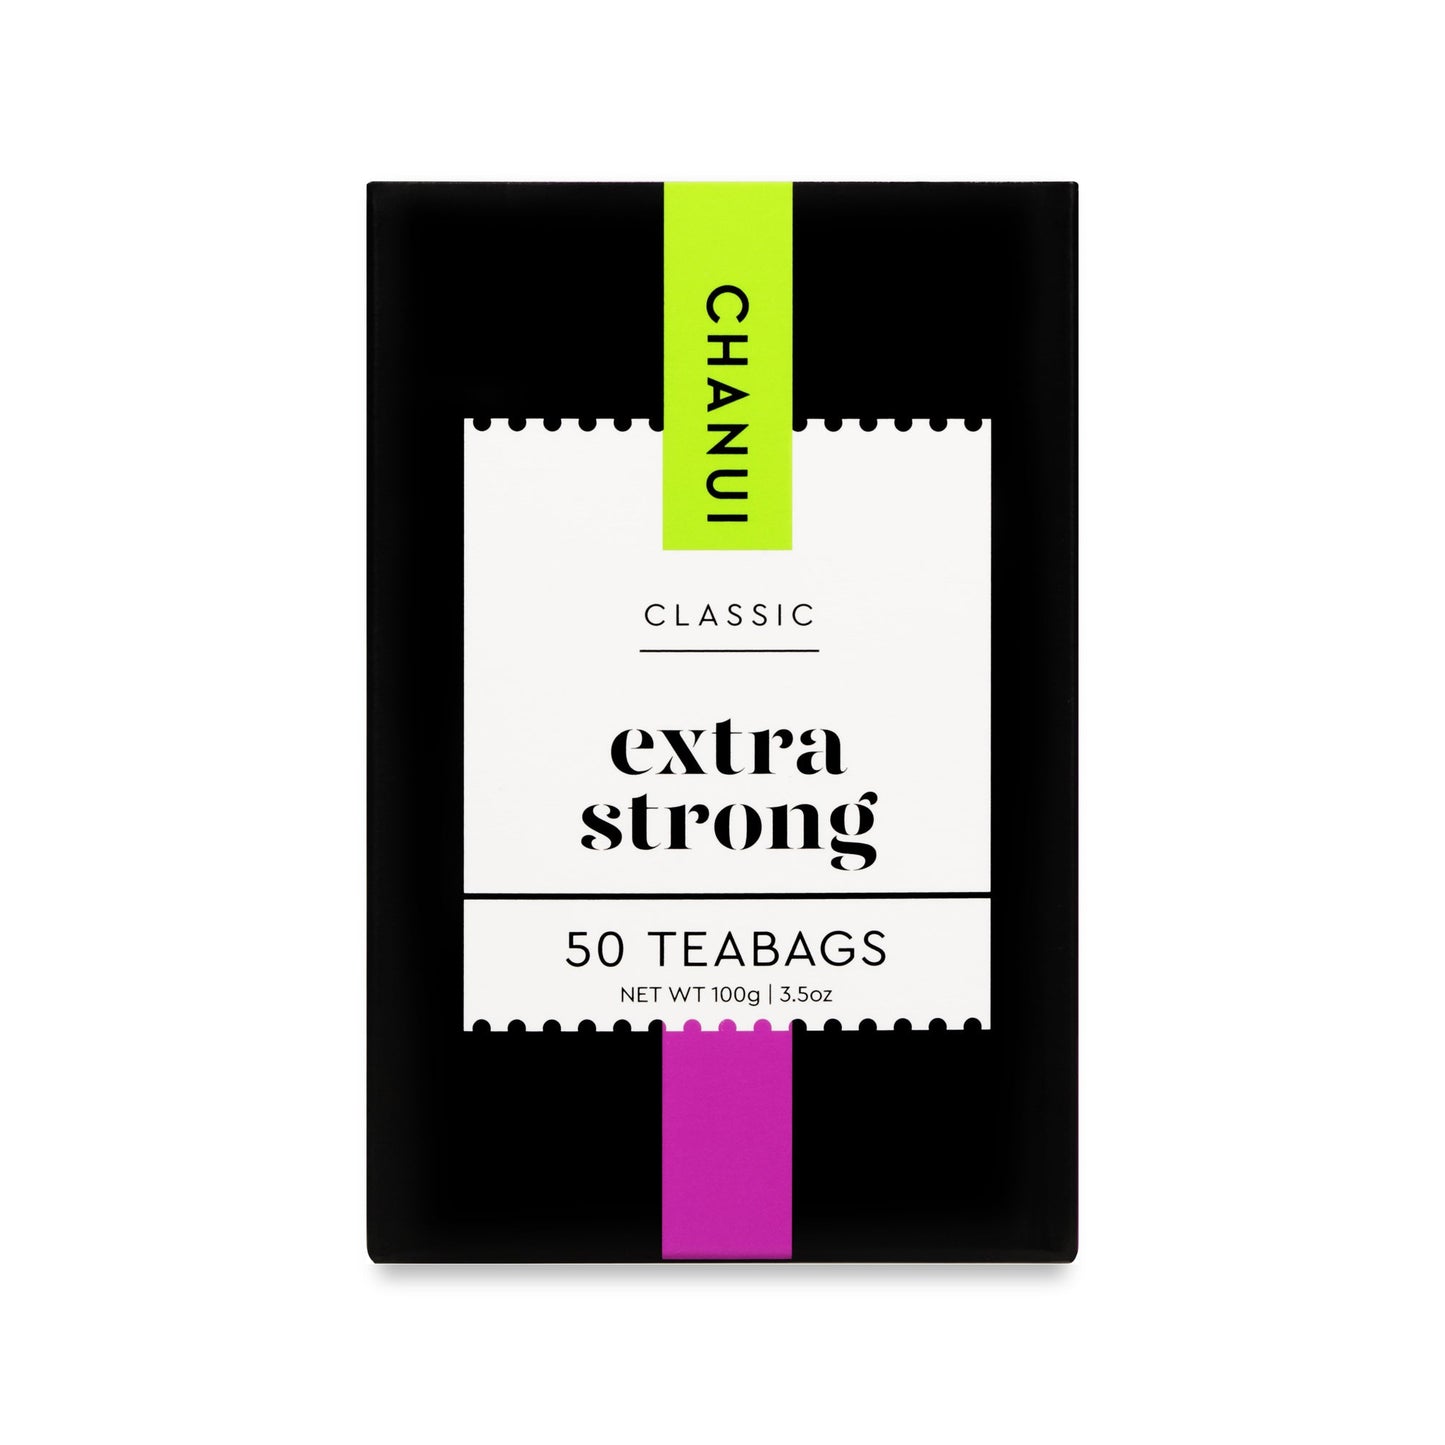 Purple and Black box of Chanui Extra Strong 50 Teabags